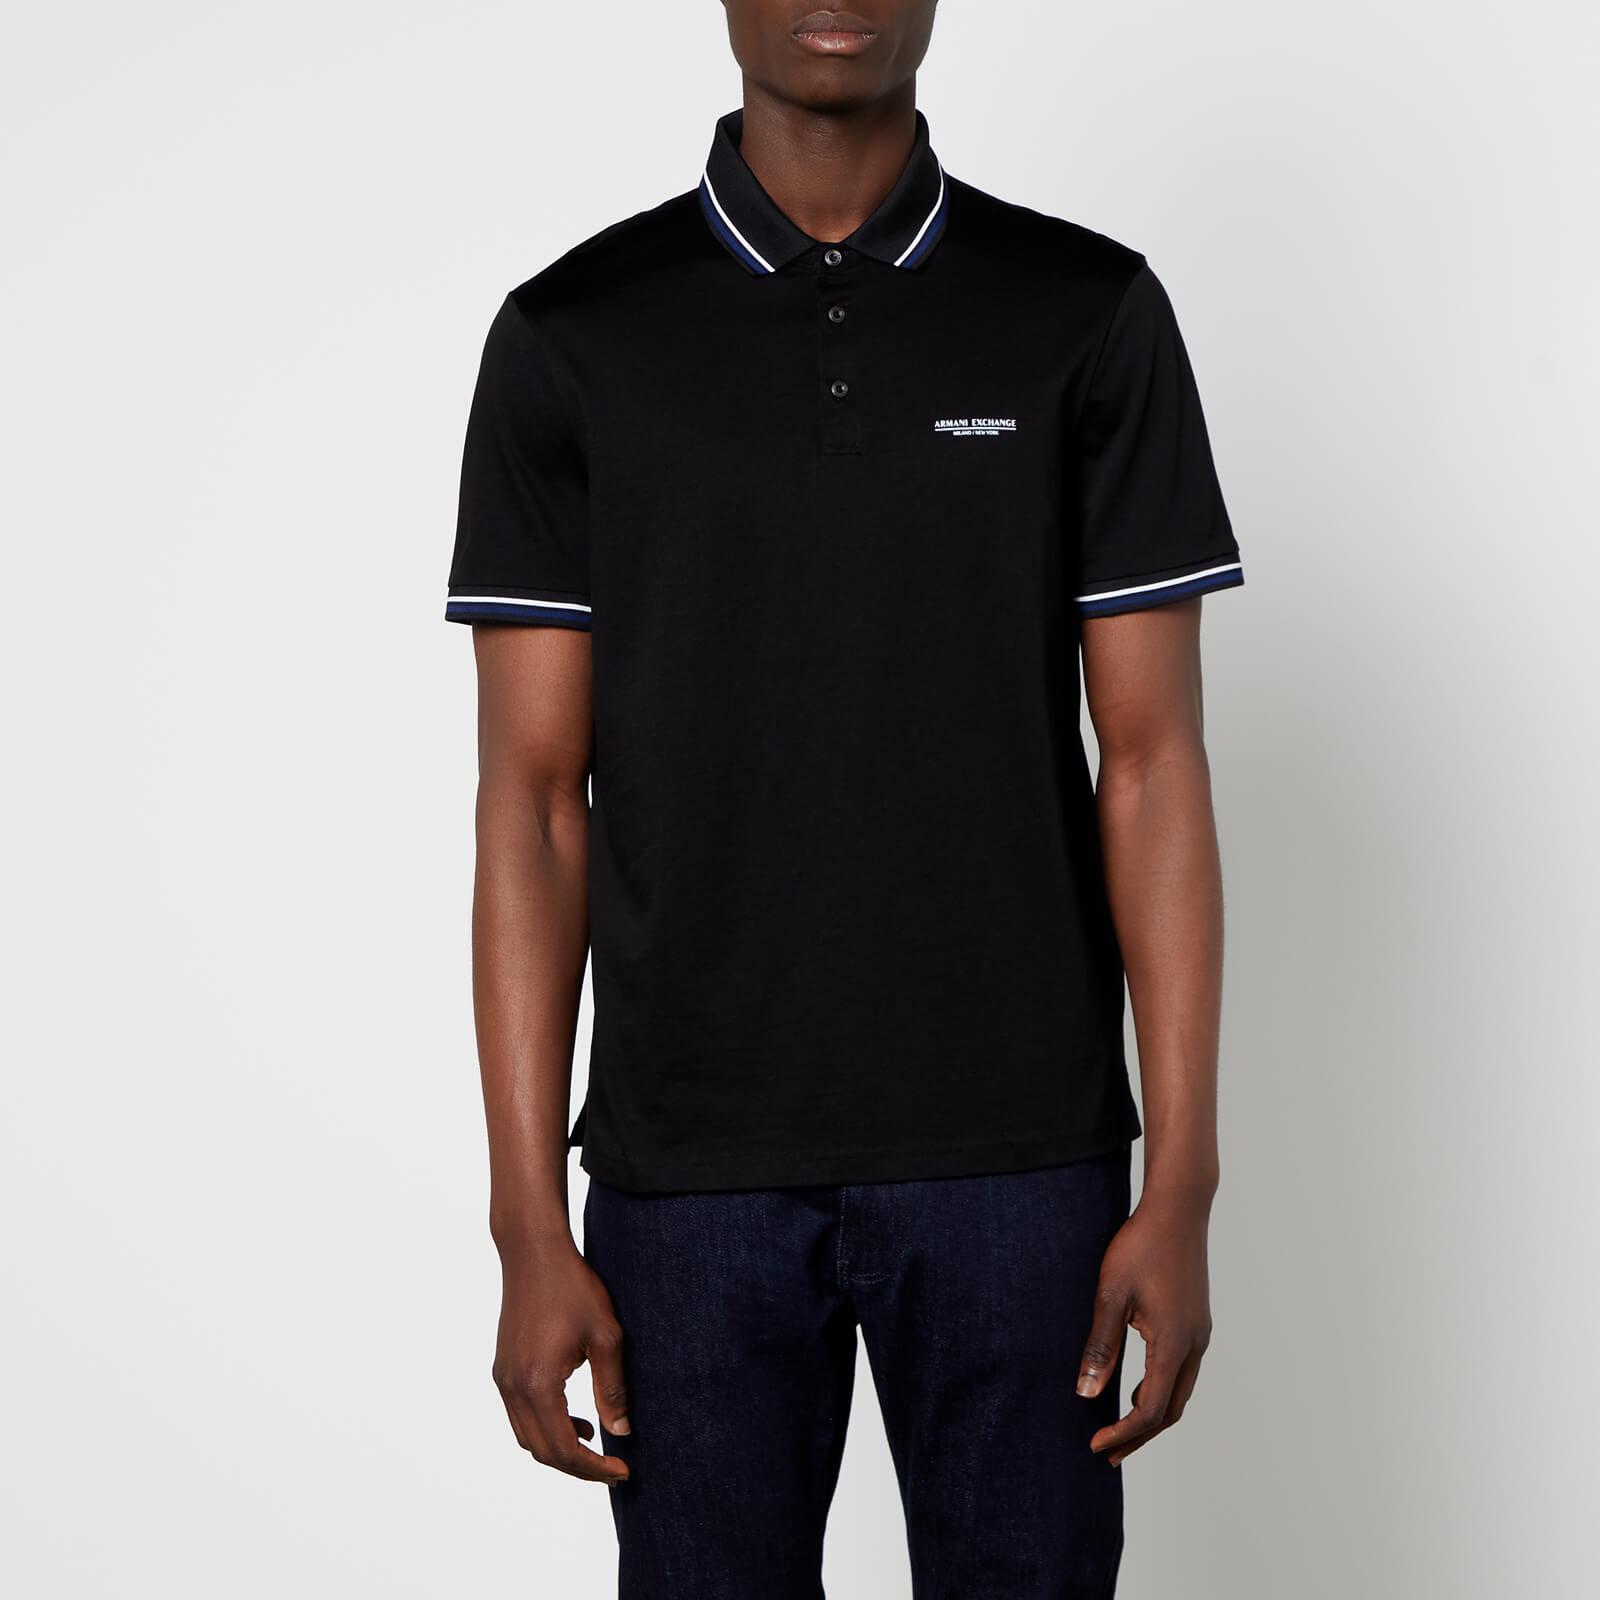 Armani Exchange Cotton Polo Shirt in Black for Lyst